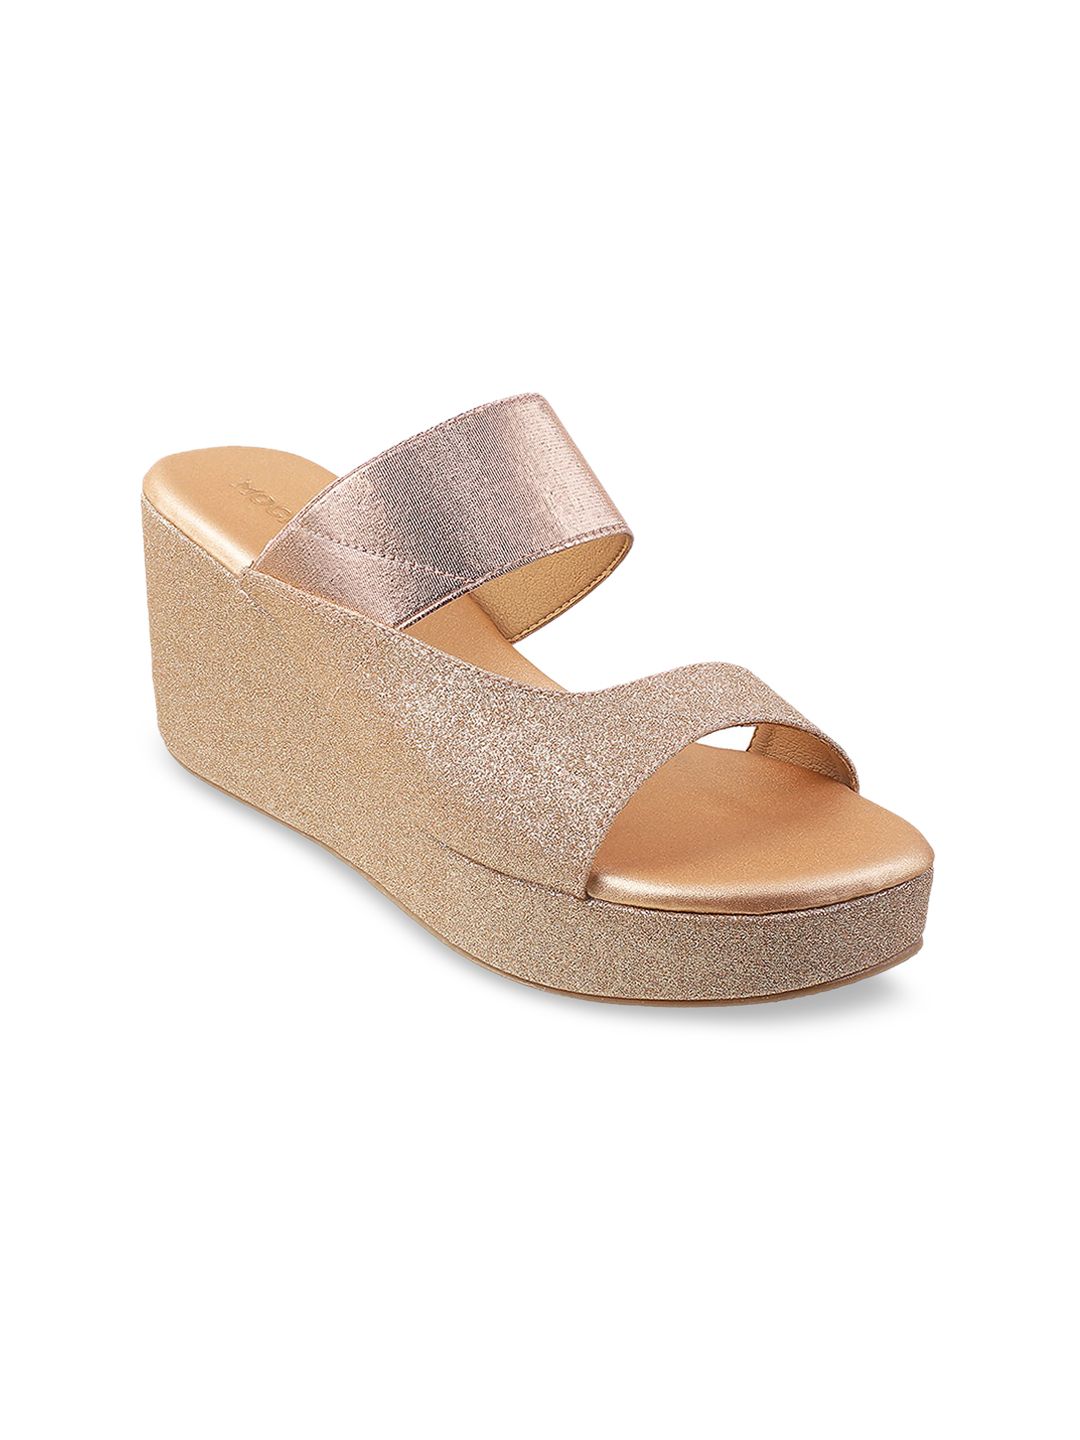 Mochi Women Rose Gold & Gold-Toned Glitter Embellished Wedge Heels Price in India